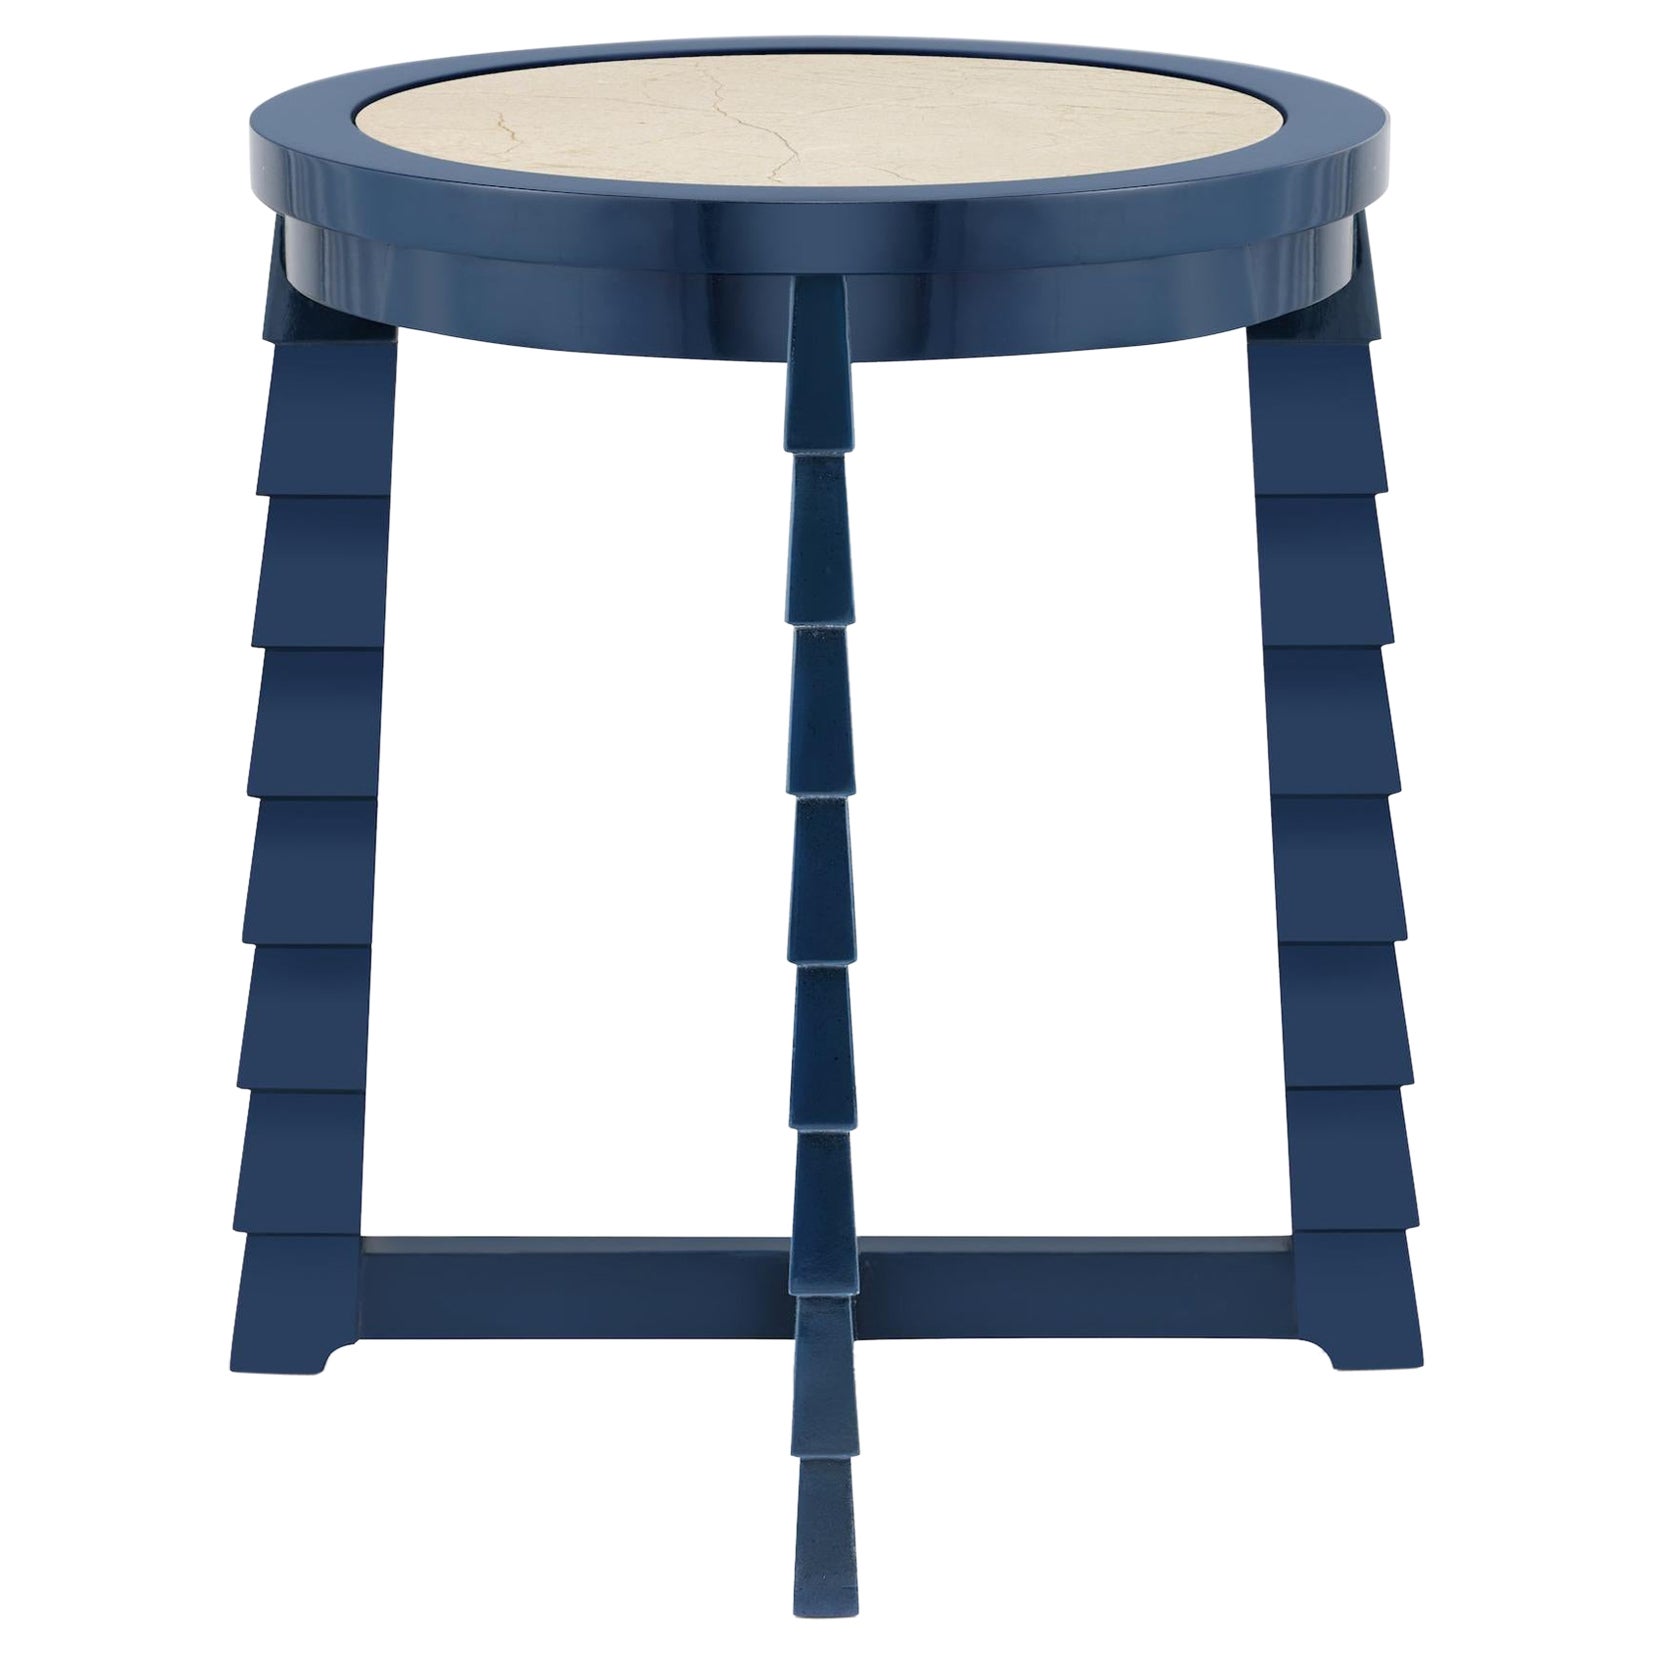 Bunny Williams Home Mateo Drinks Table, Blue